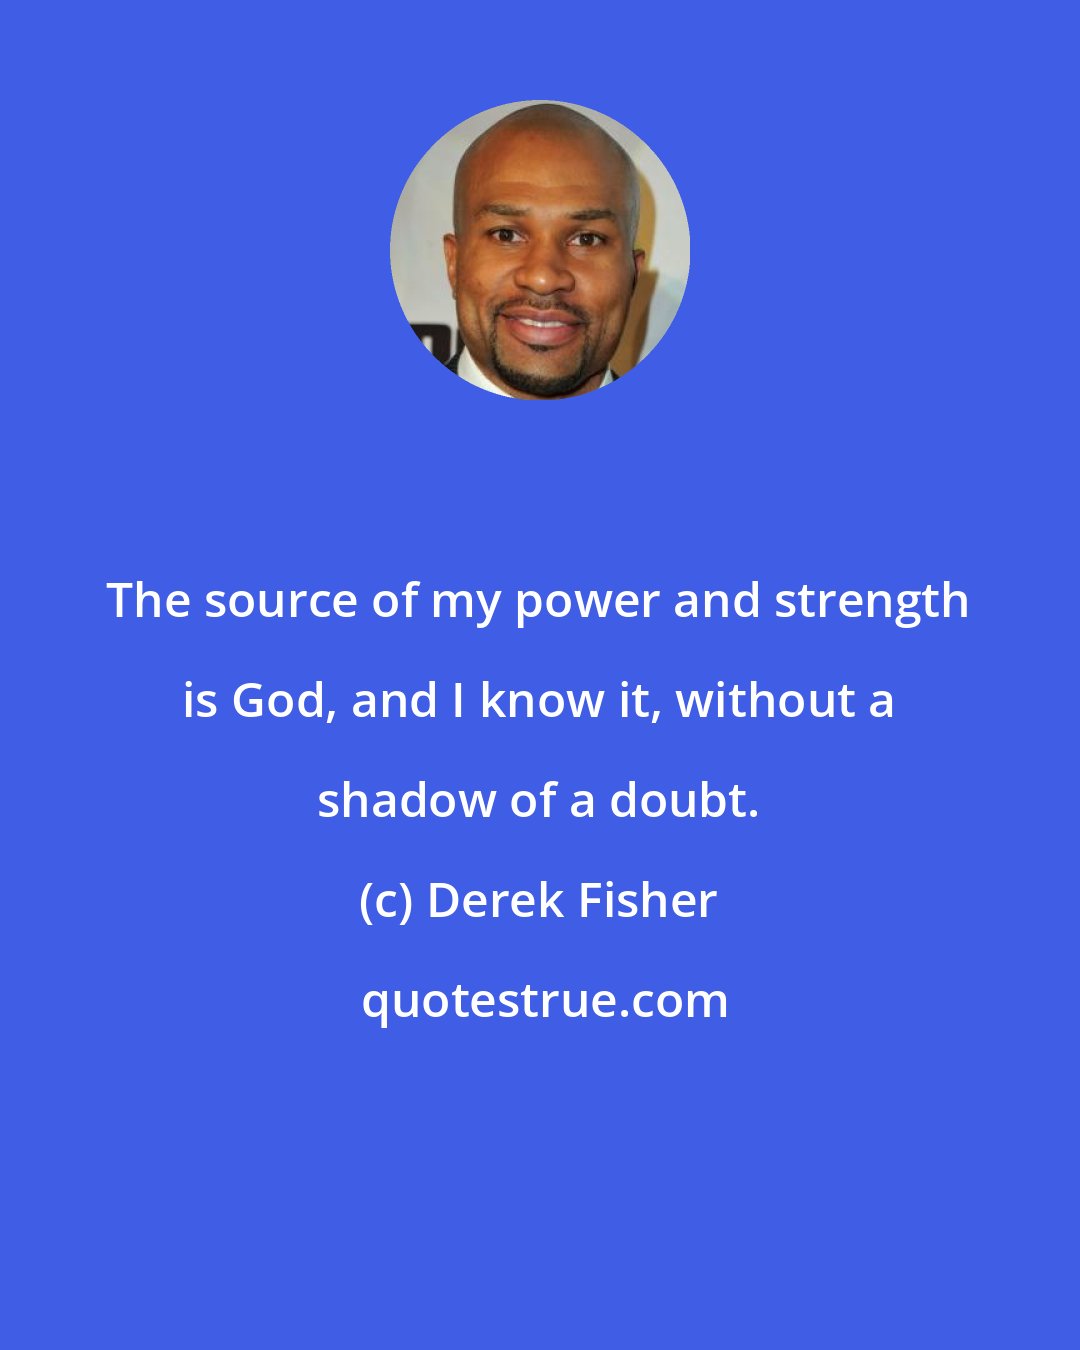 Derek Fisher: The source of my power and strength is God, and I know it, without a shadow of a doubt.